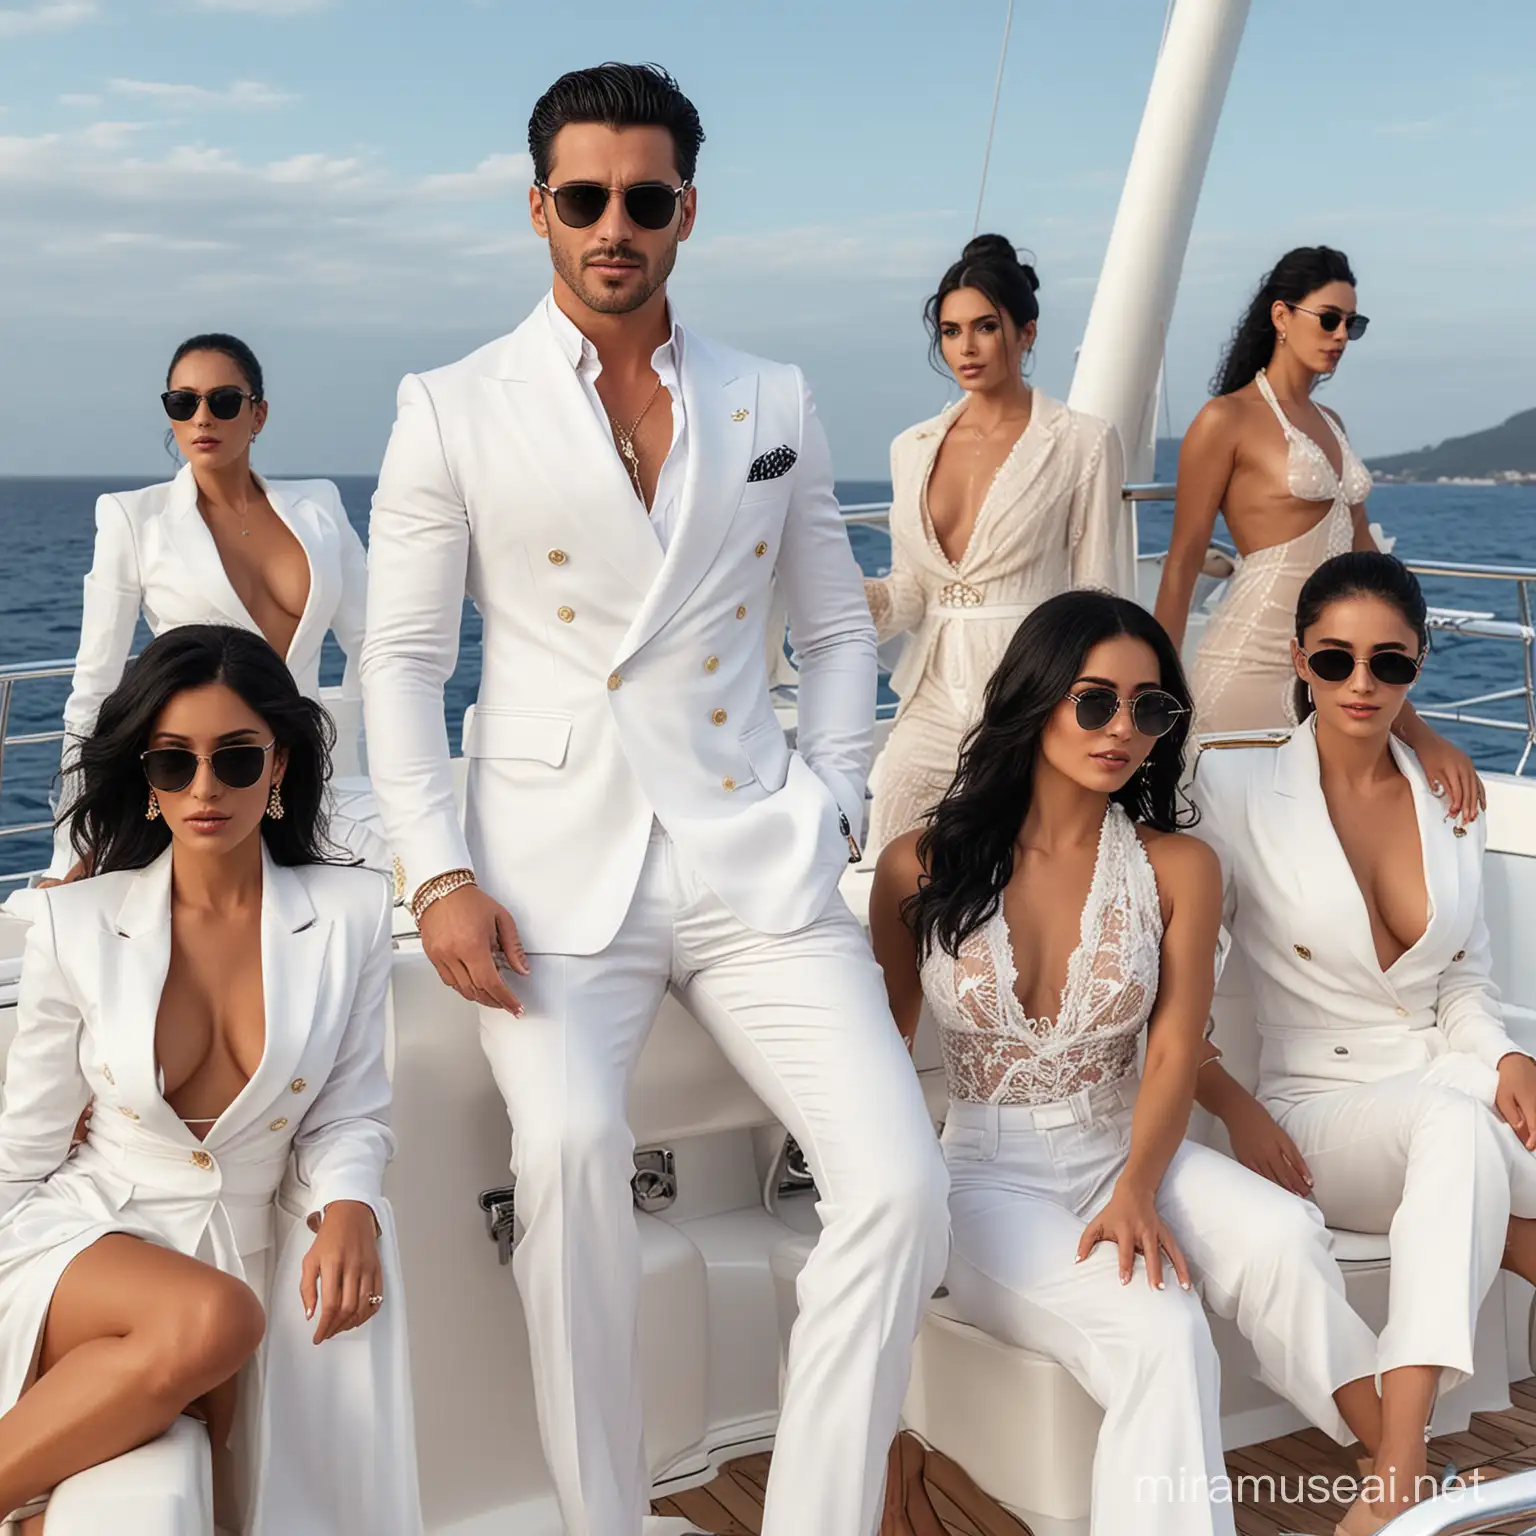 Handsome man wearing a fancy white suit with black hair, stubble and sunglasses with a group of sexy women sitting on a yacht